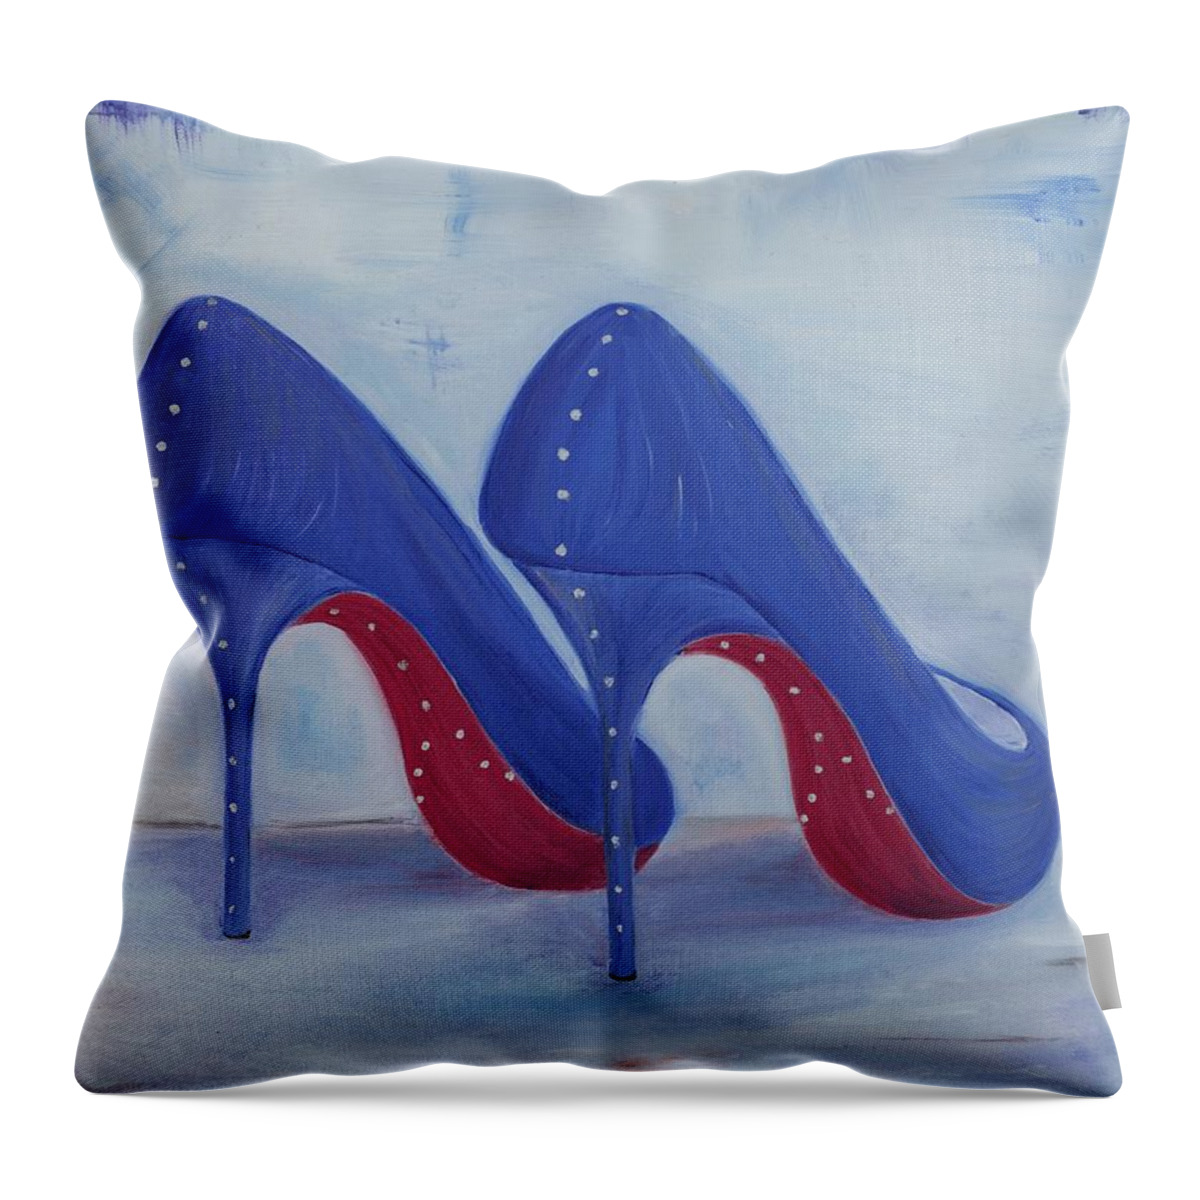 Shoes Throw Pillow featuring the painting Red Soul Shoes by Neslihan Ergul Colley